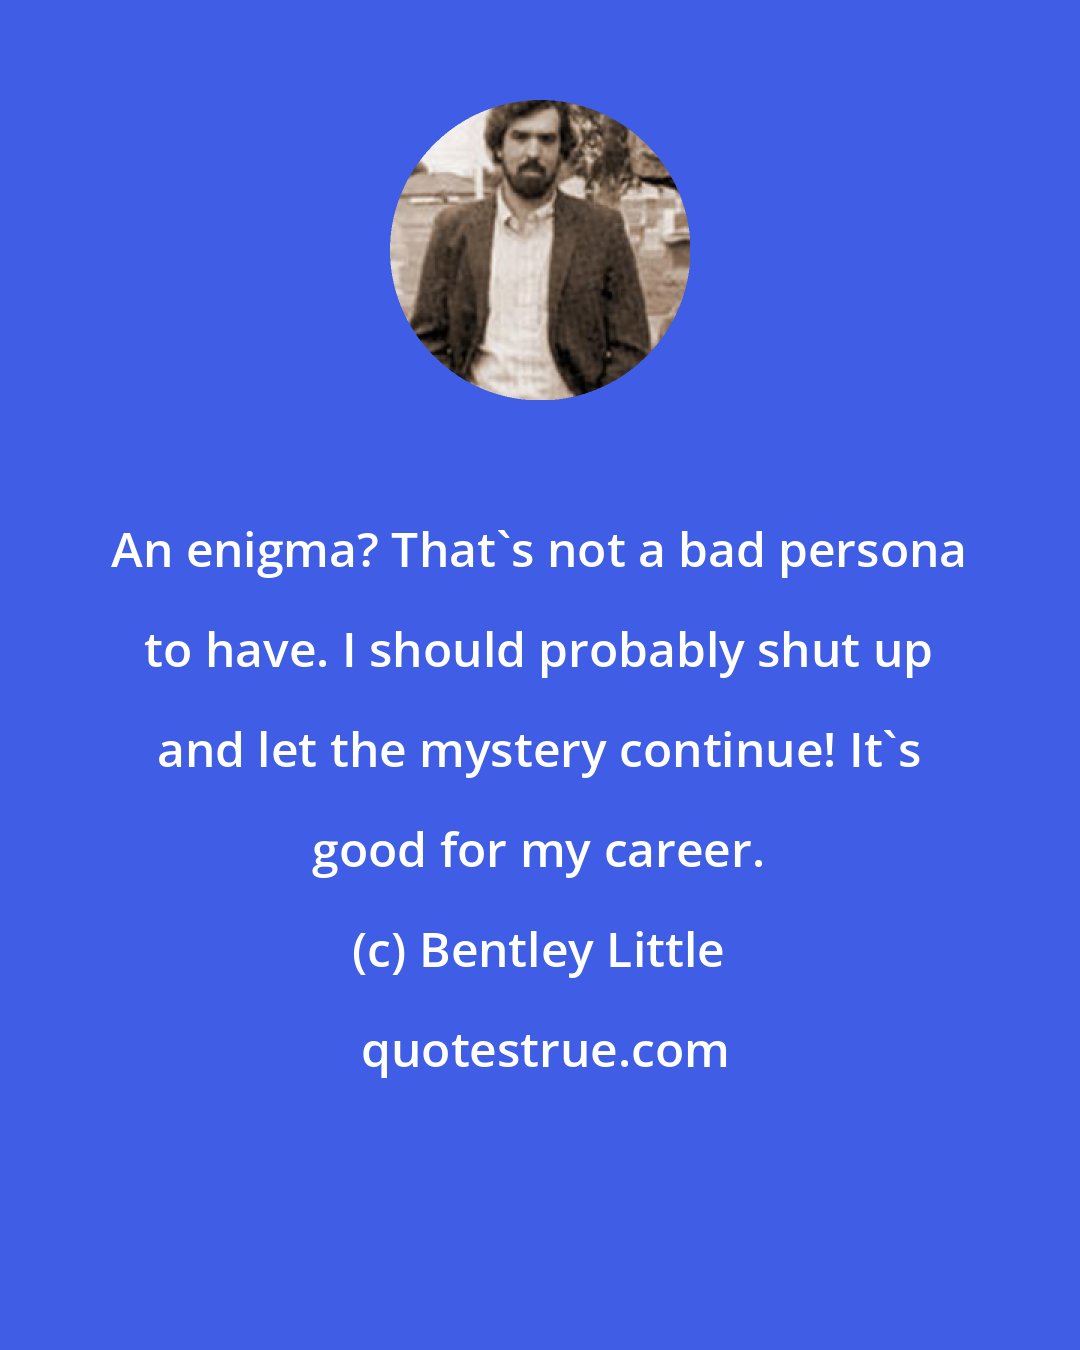 Bentley Little: An enigma? That's not a bad persona to have. I should probably shut up and let the mystery continue! It's good for my career.